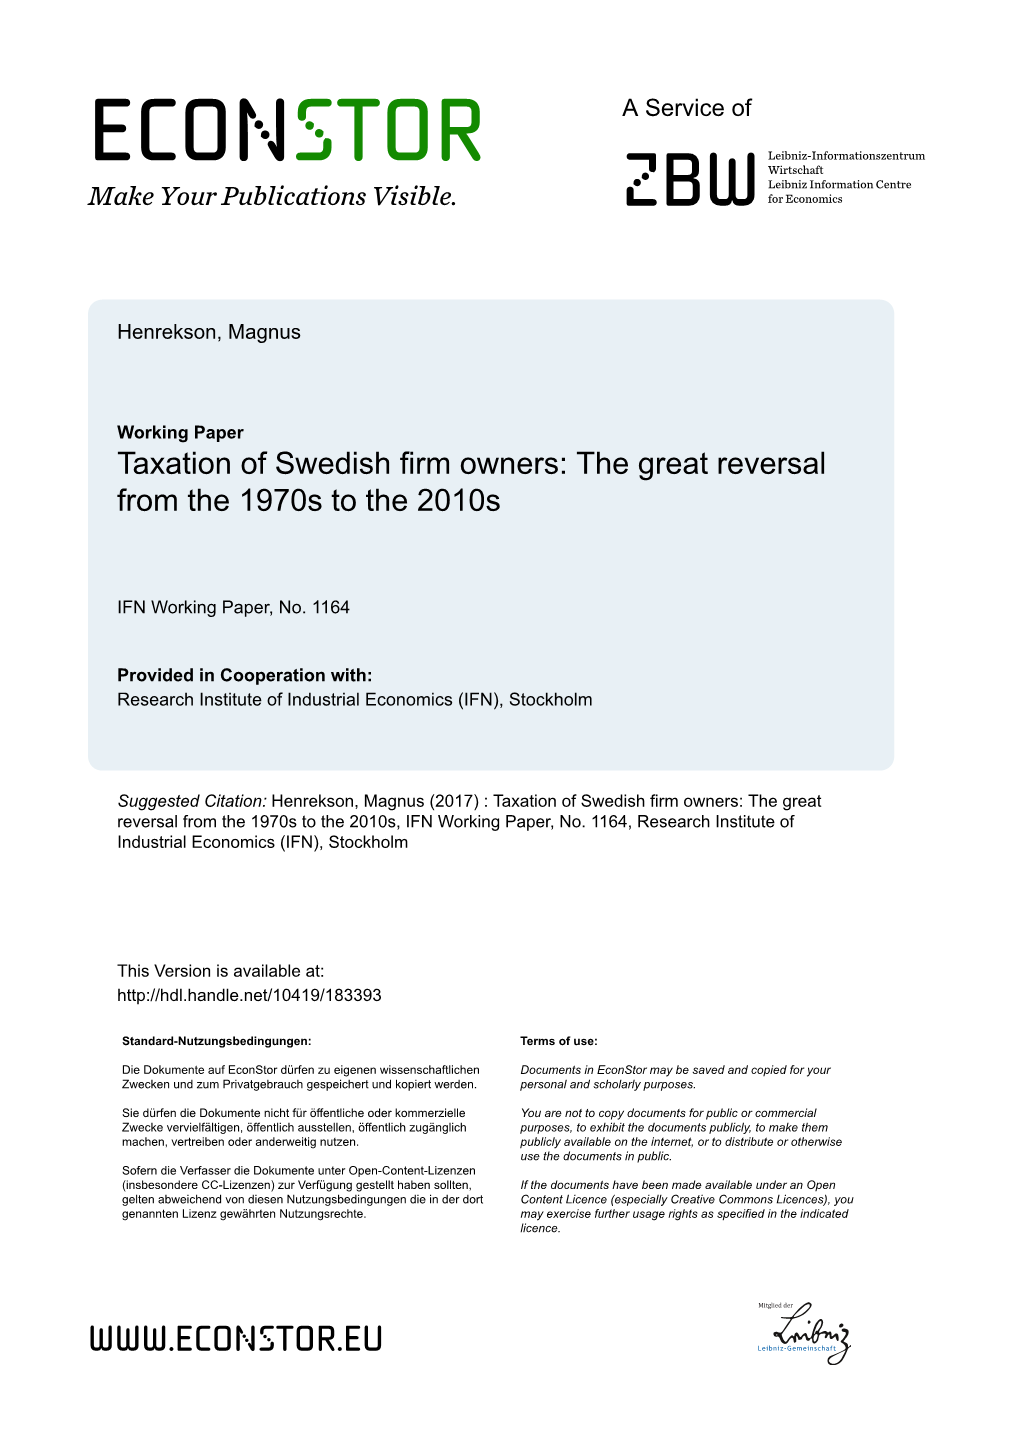 Taxation of Swedish Firm Owners: the Great Reversal from the 1970S to the 2010S